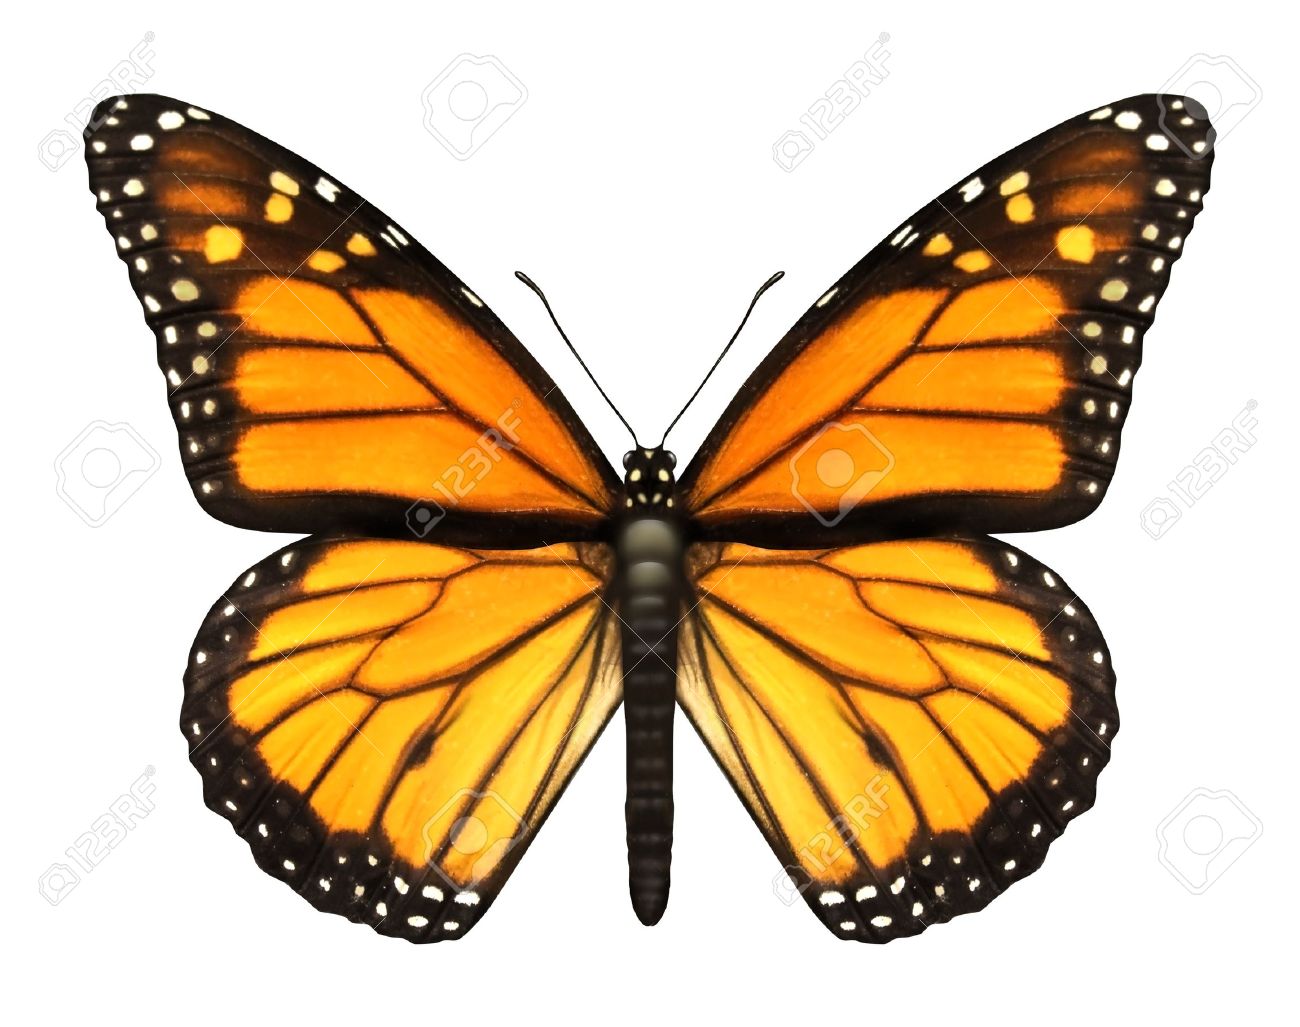 15975773-monarch-butterfly-with-open-wings-in-a-top-view-as-a-flying-migratory-insect-butterflies-that-repres.jpg